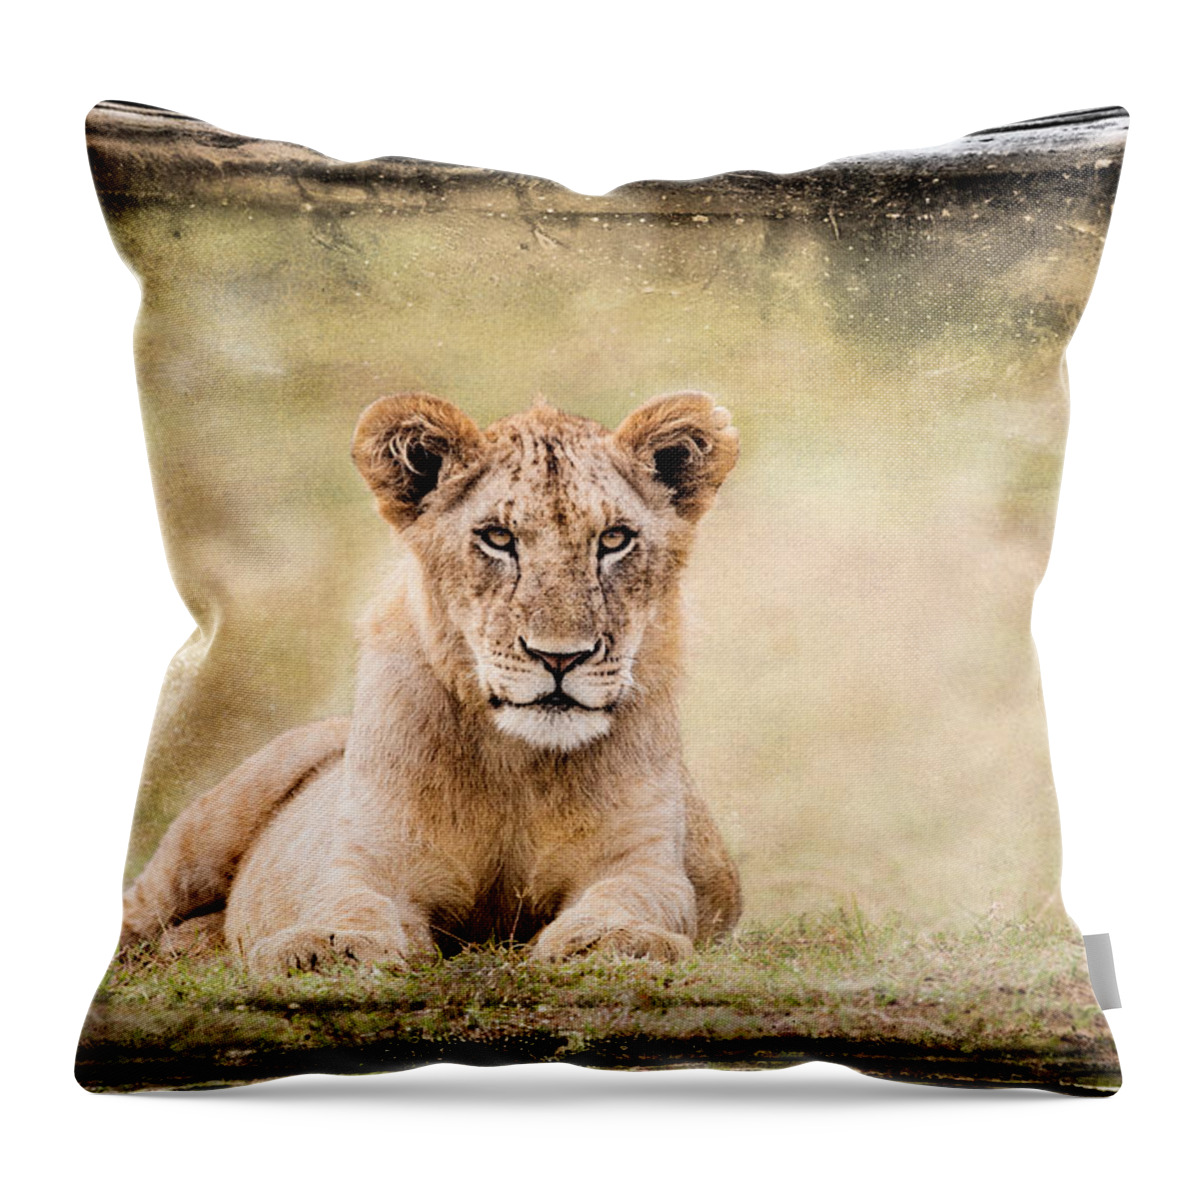 Africa Throw Pillow featuring the photograph Serene Lioness by Mike Gaudaur